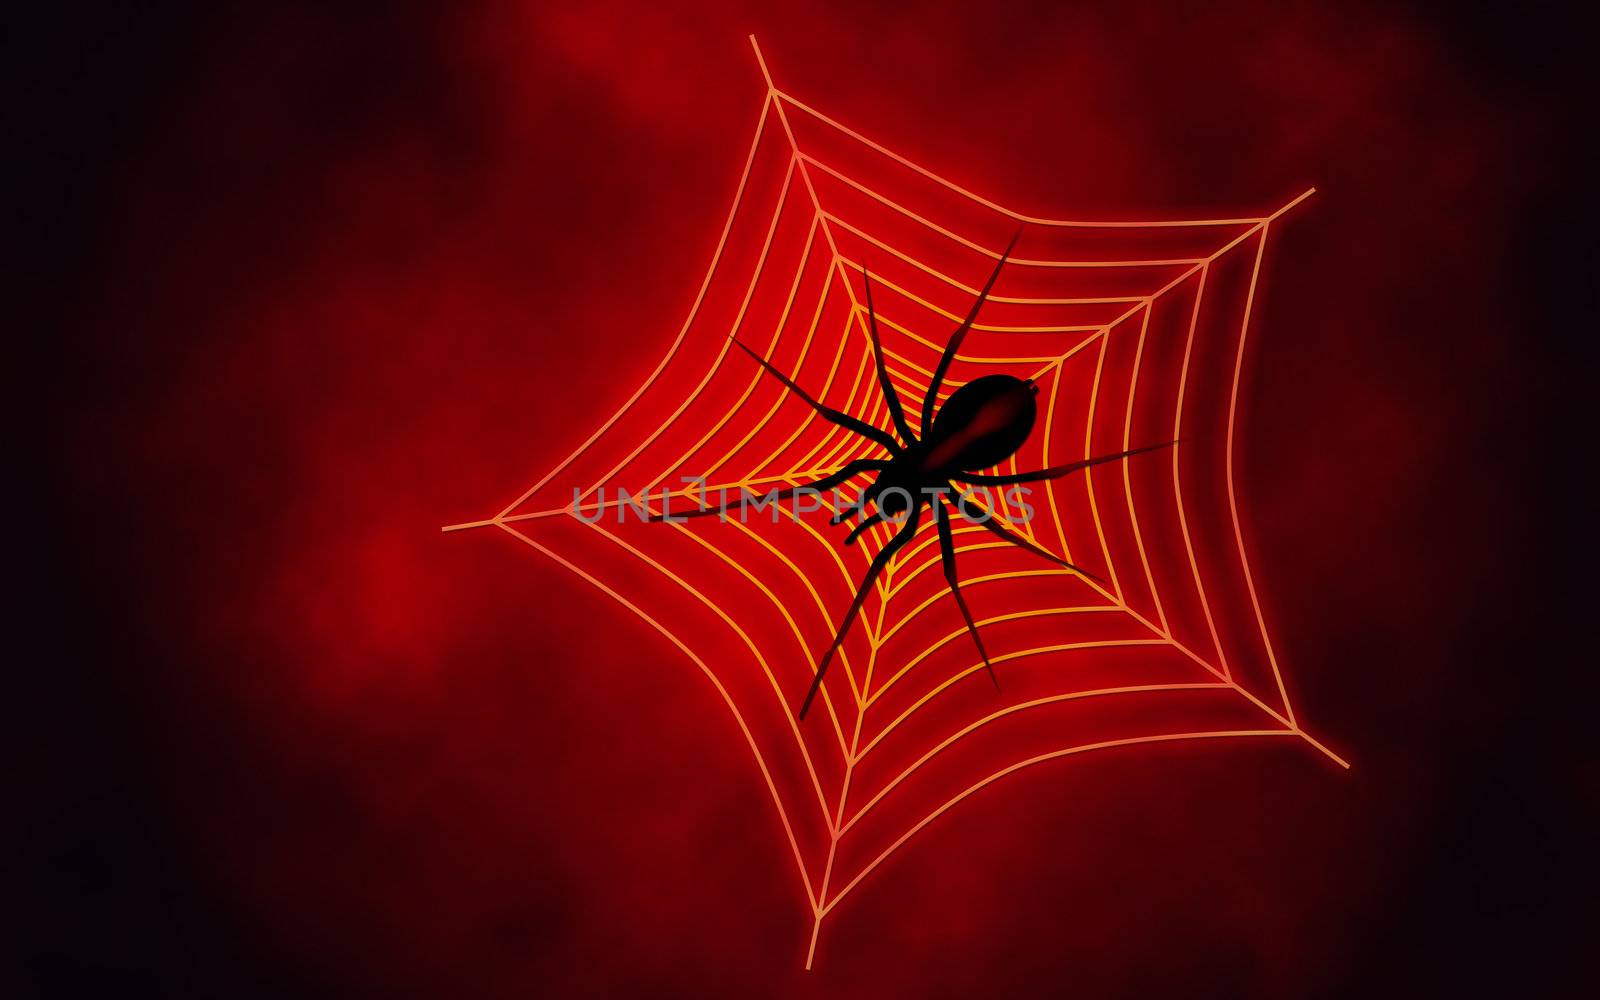 We see Spider web with big spider on red background